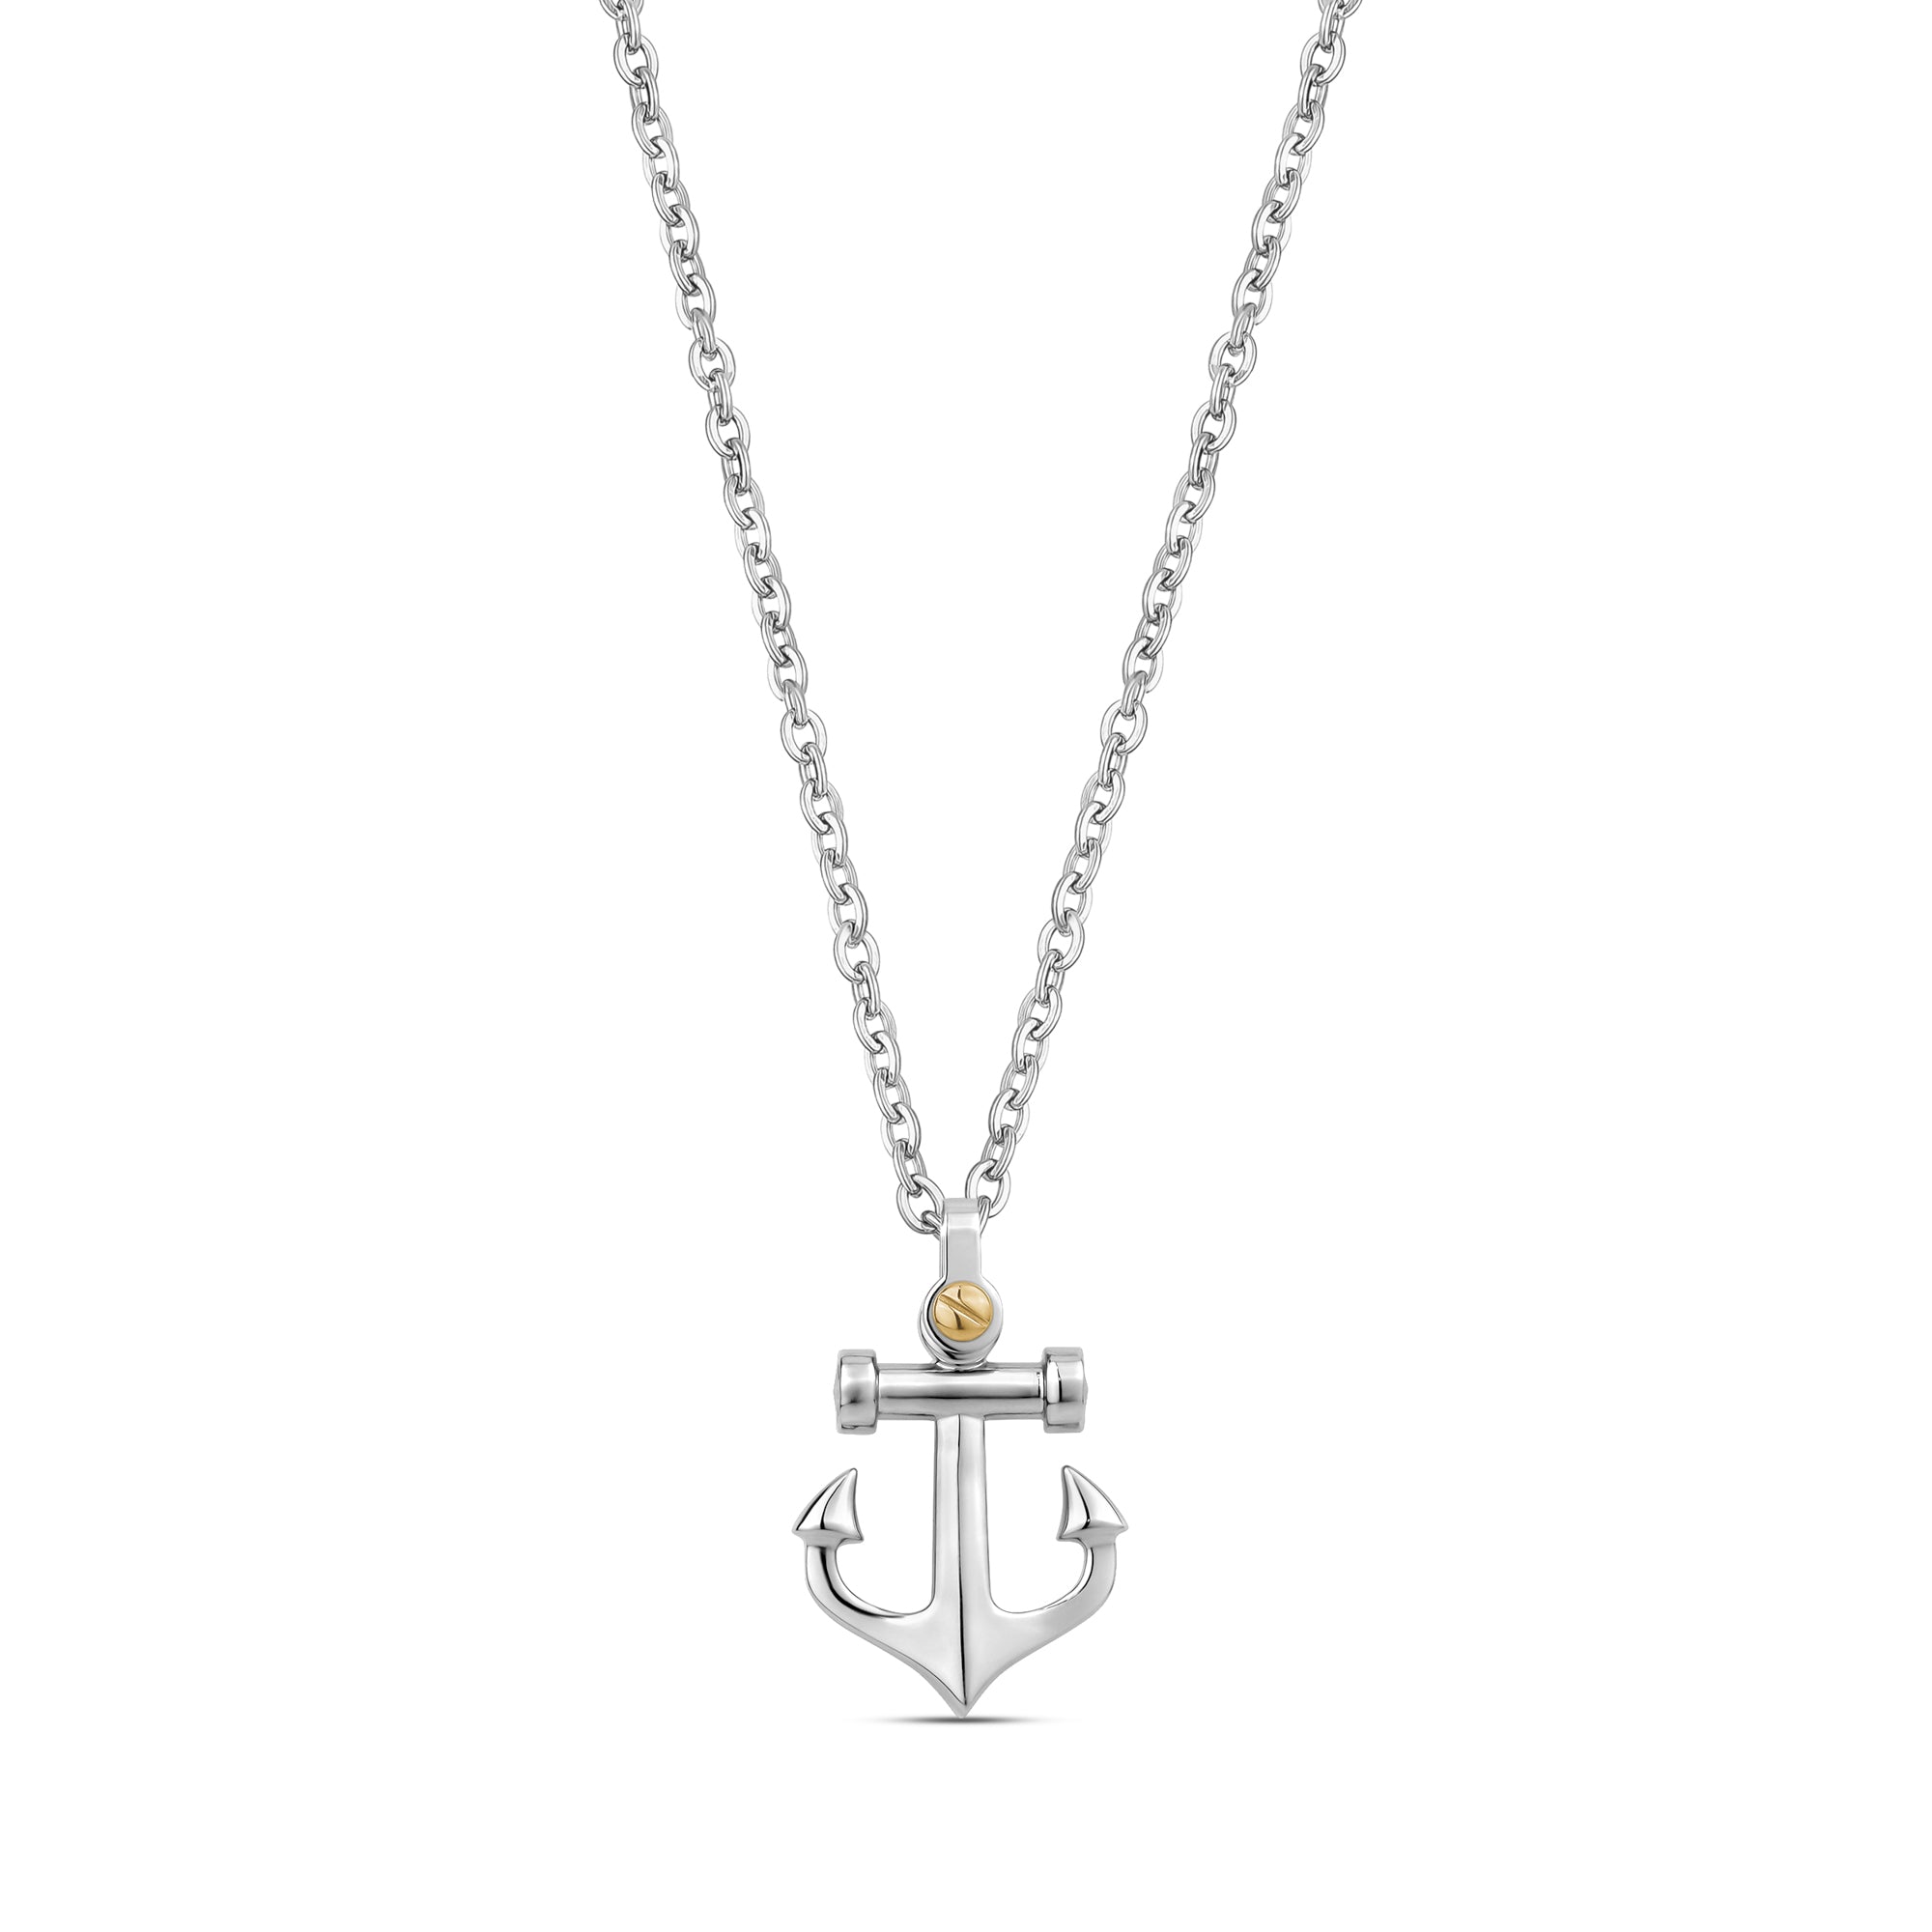 Browse Stylish Designs of 14k Large Anchor Pendant - J.H. Breakell and Co.